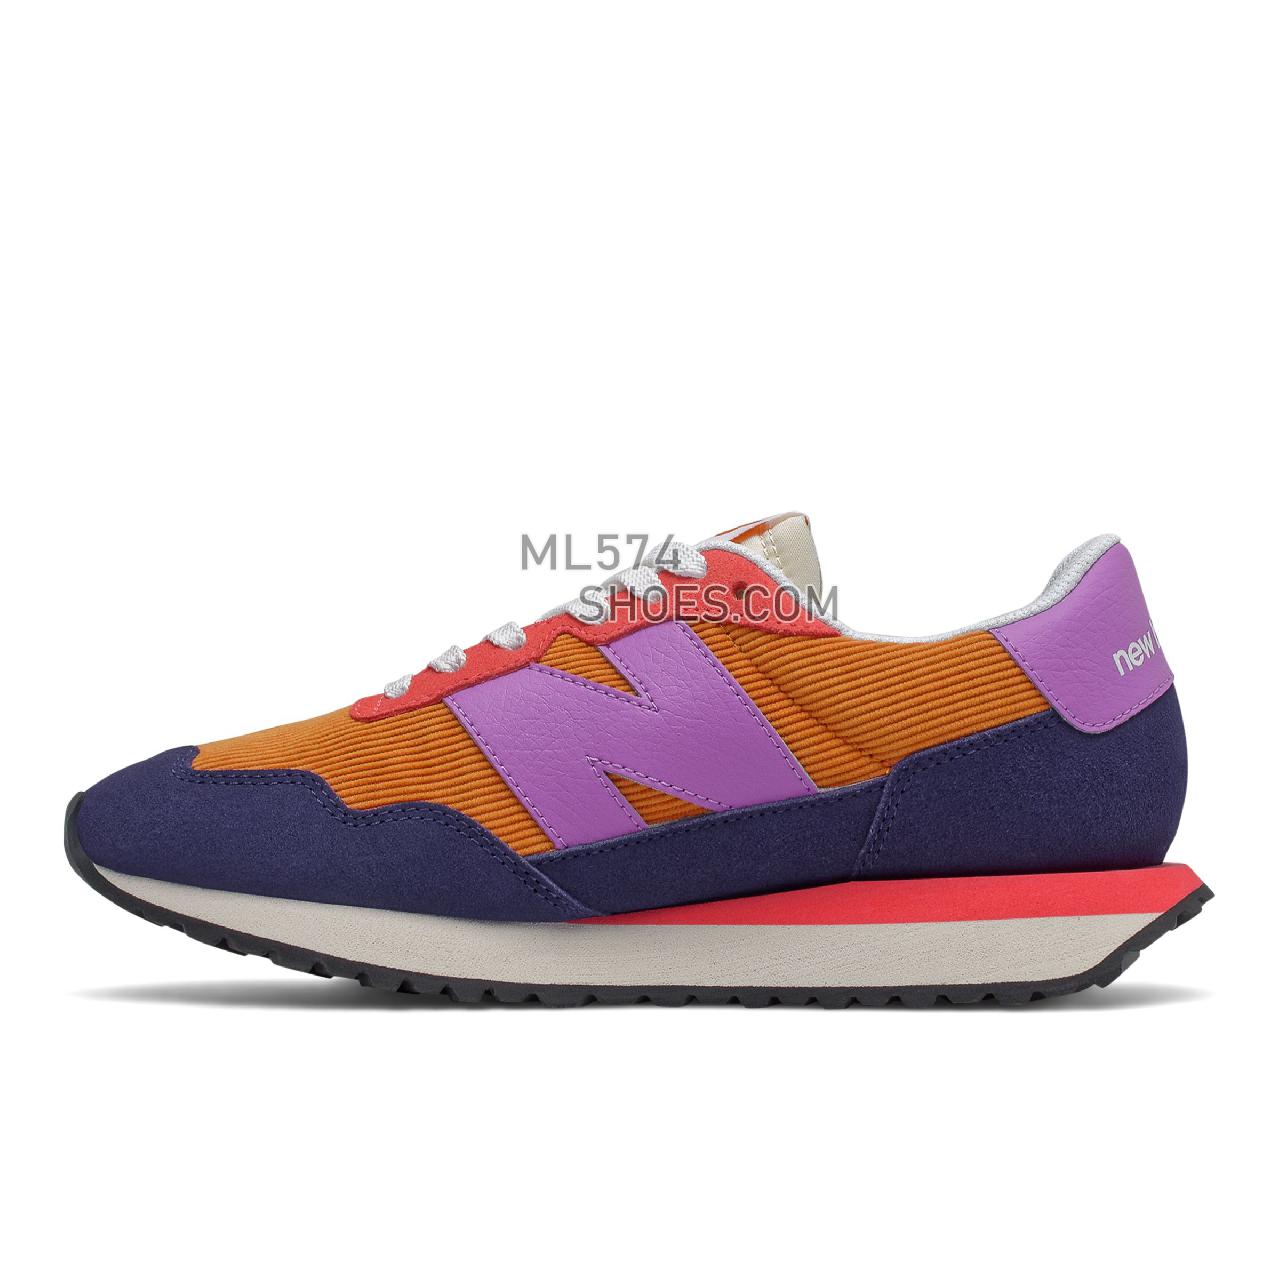 New Balance 237 - Women's Classic Sneakers - Night Tide with Heliotrope - WS237WT1